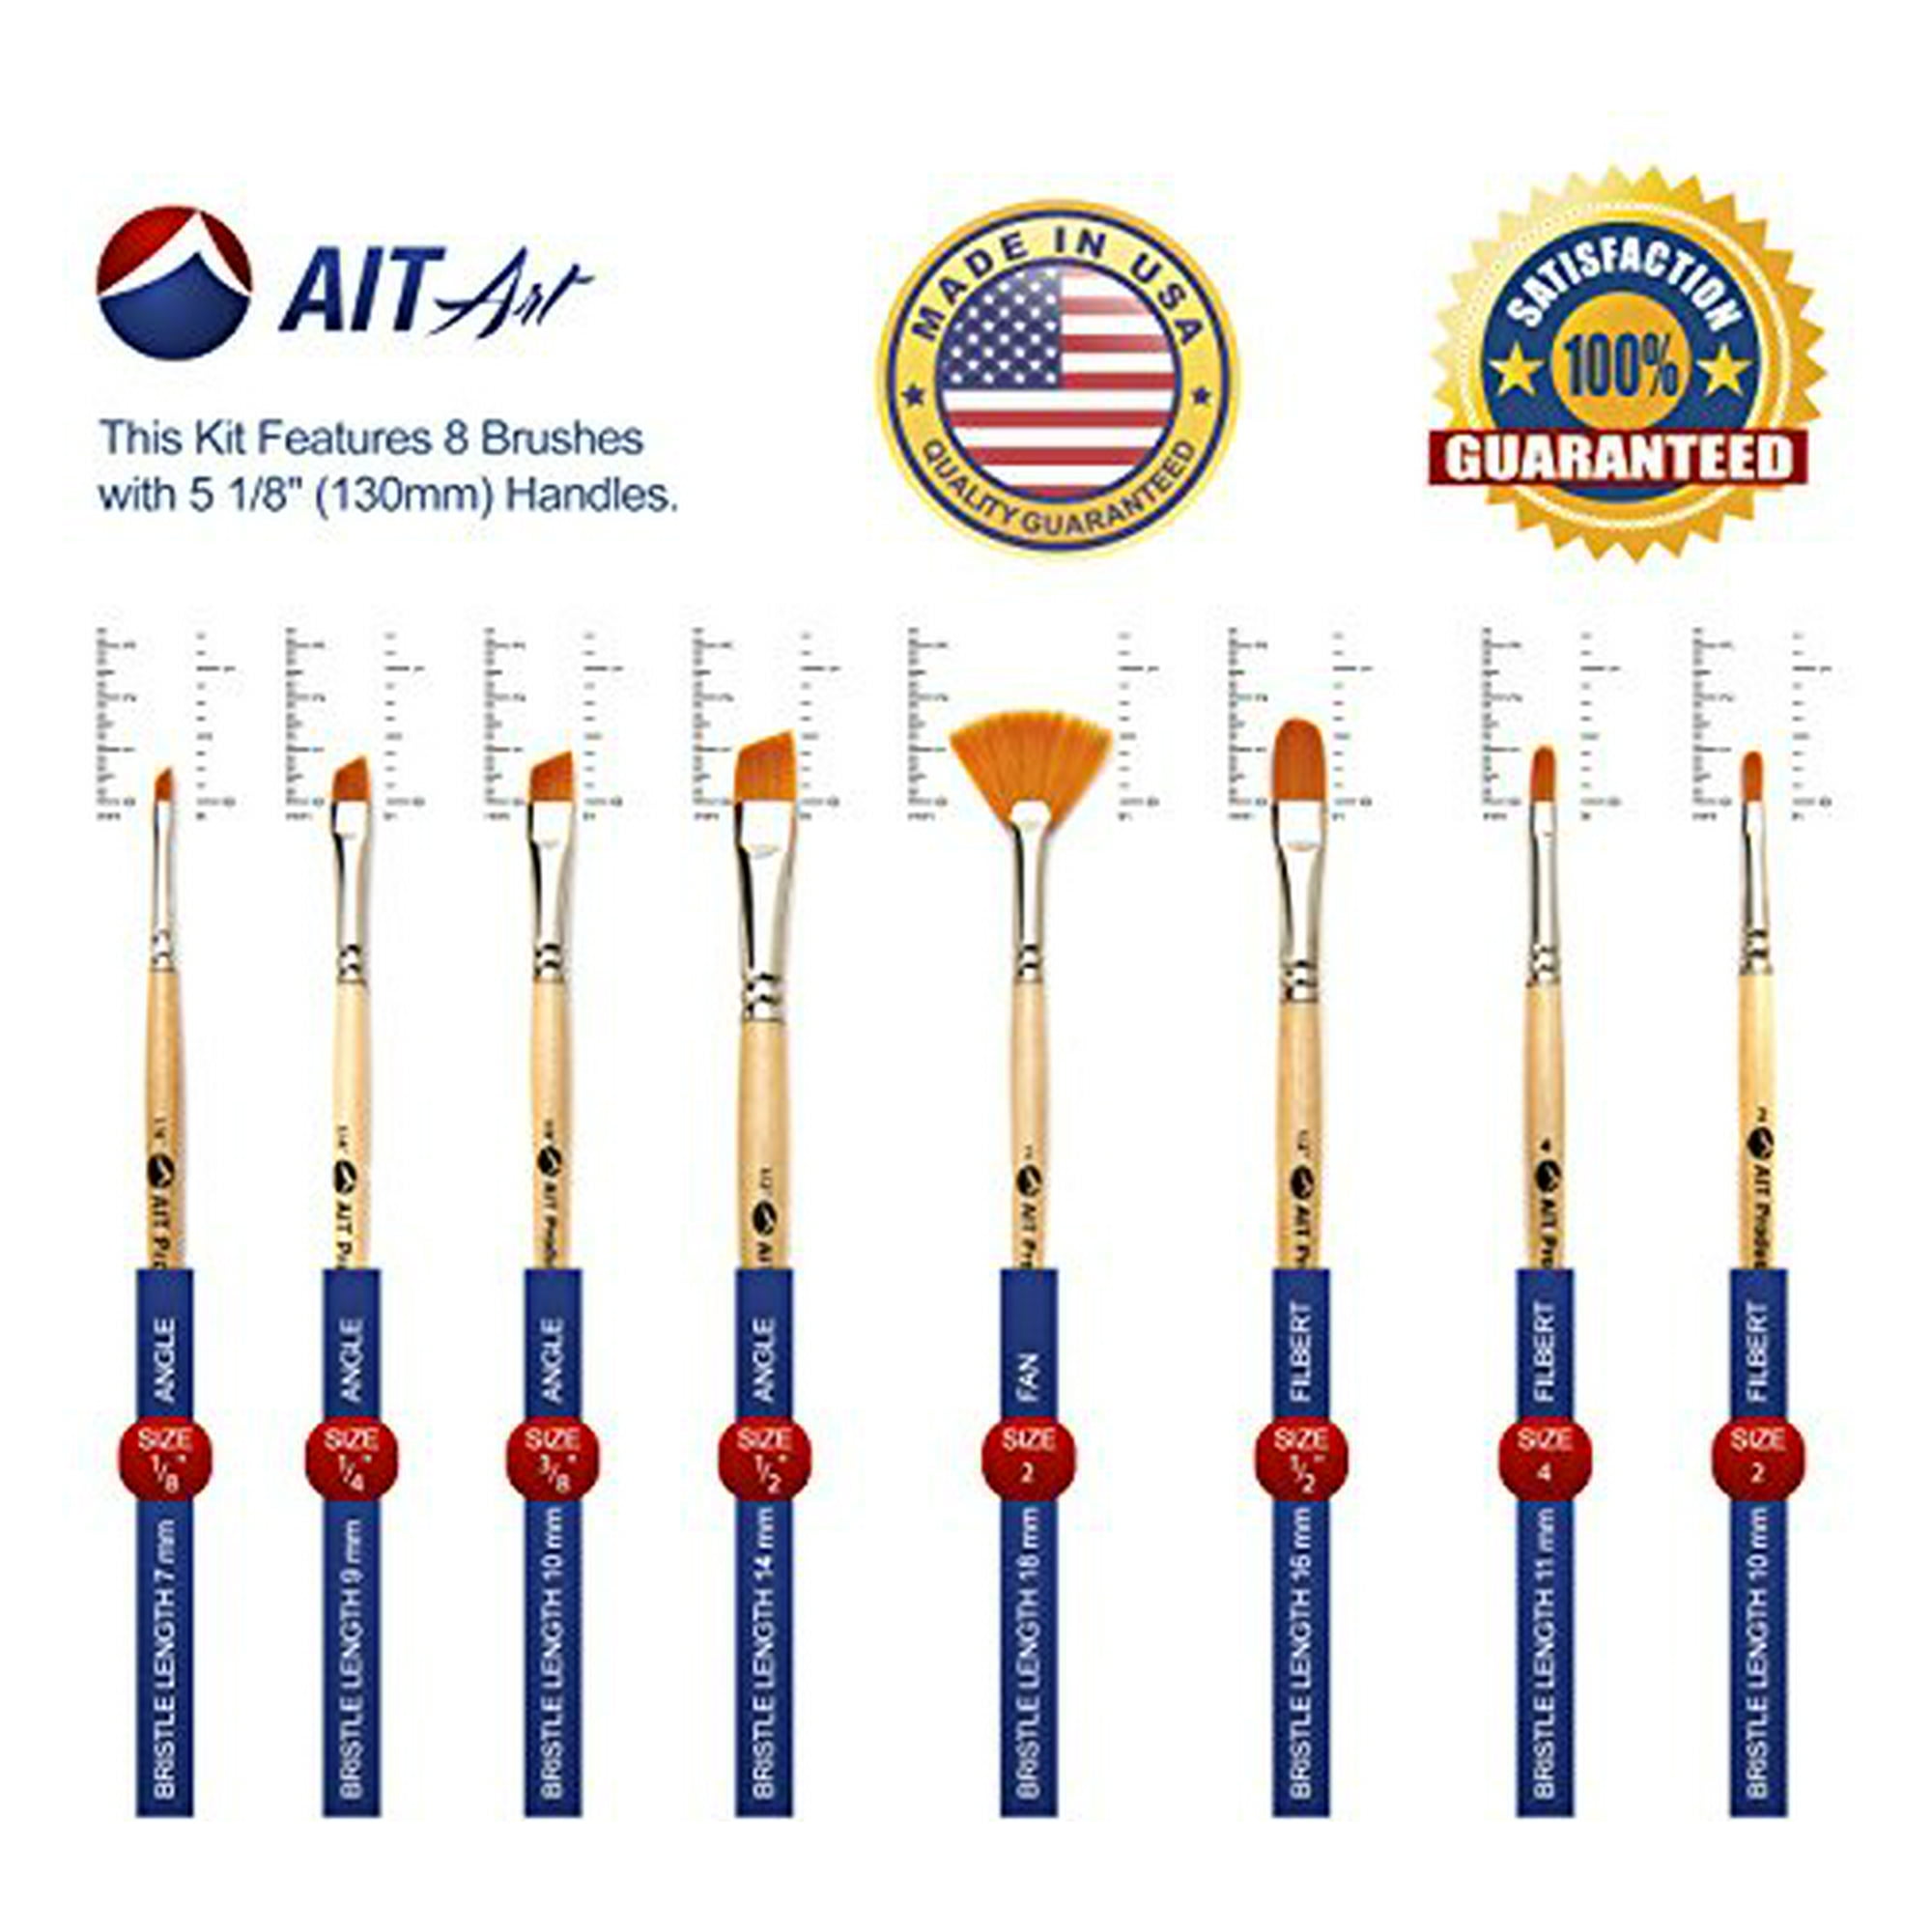 AIT Art Paint Brushes, Set of 8 Includes Angle Shaders, Filberts, and A Fan, Handmade in USA to Last Longer Without Shedding or